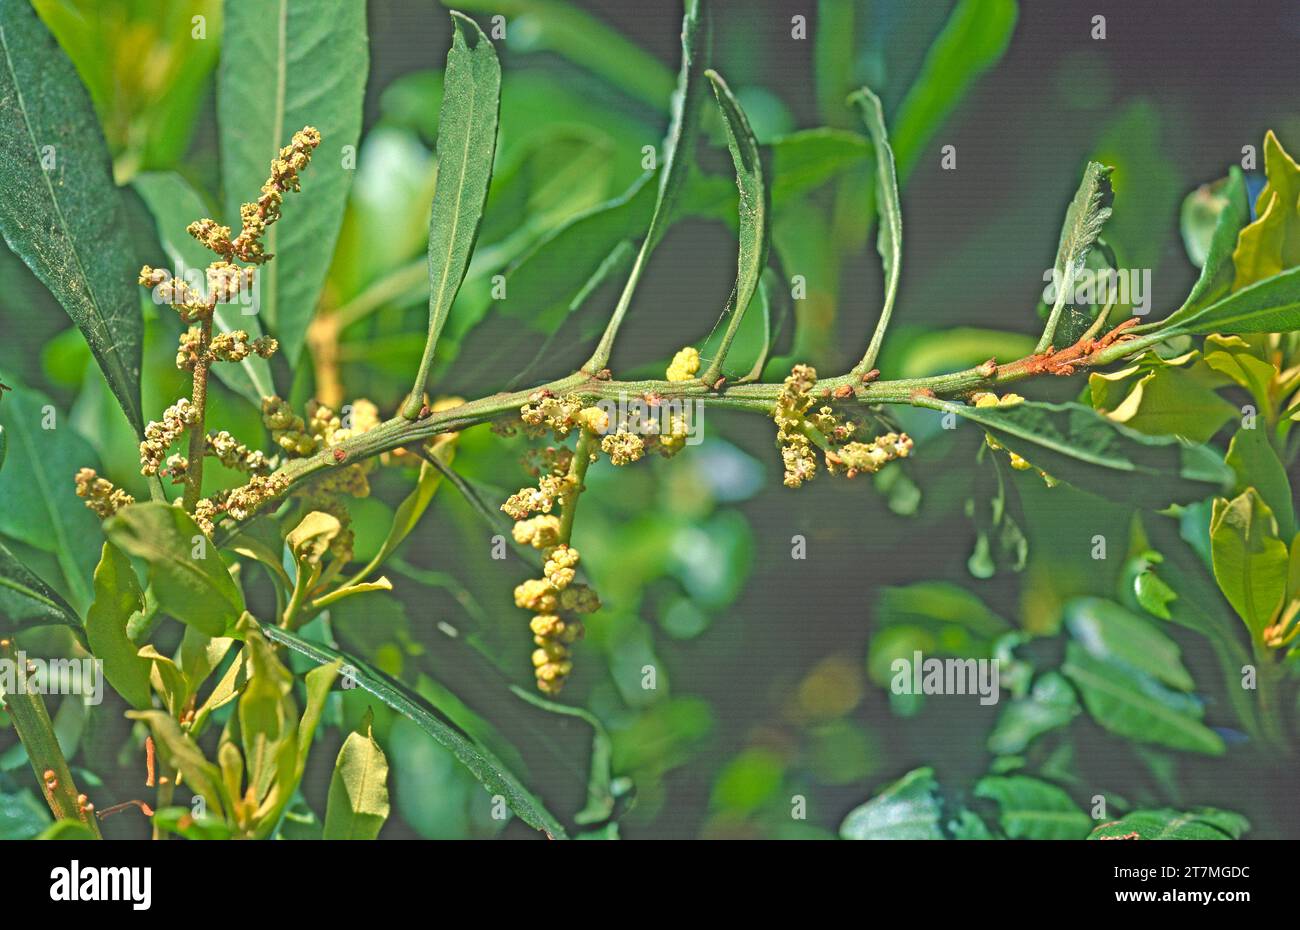 Faya (Myrica faya or Morella faya) is a small evergreen tree endemic to Macaronesia (Canary Islands, Azores and Madeira). Male flowers detail. Stock Photo